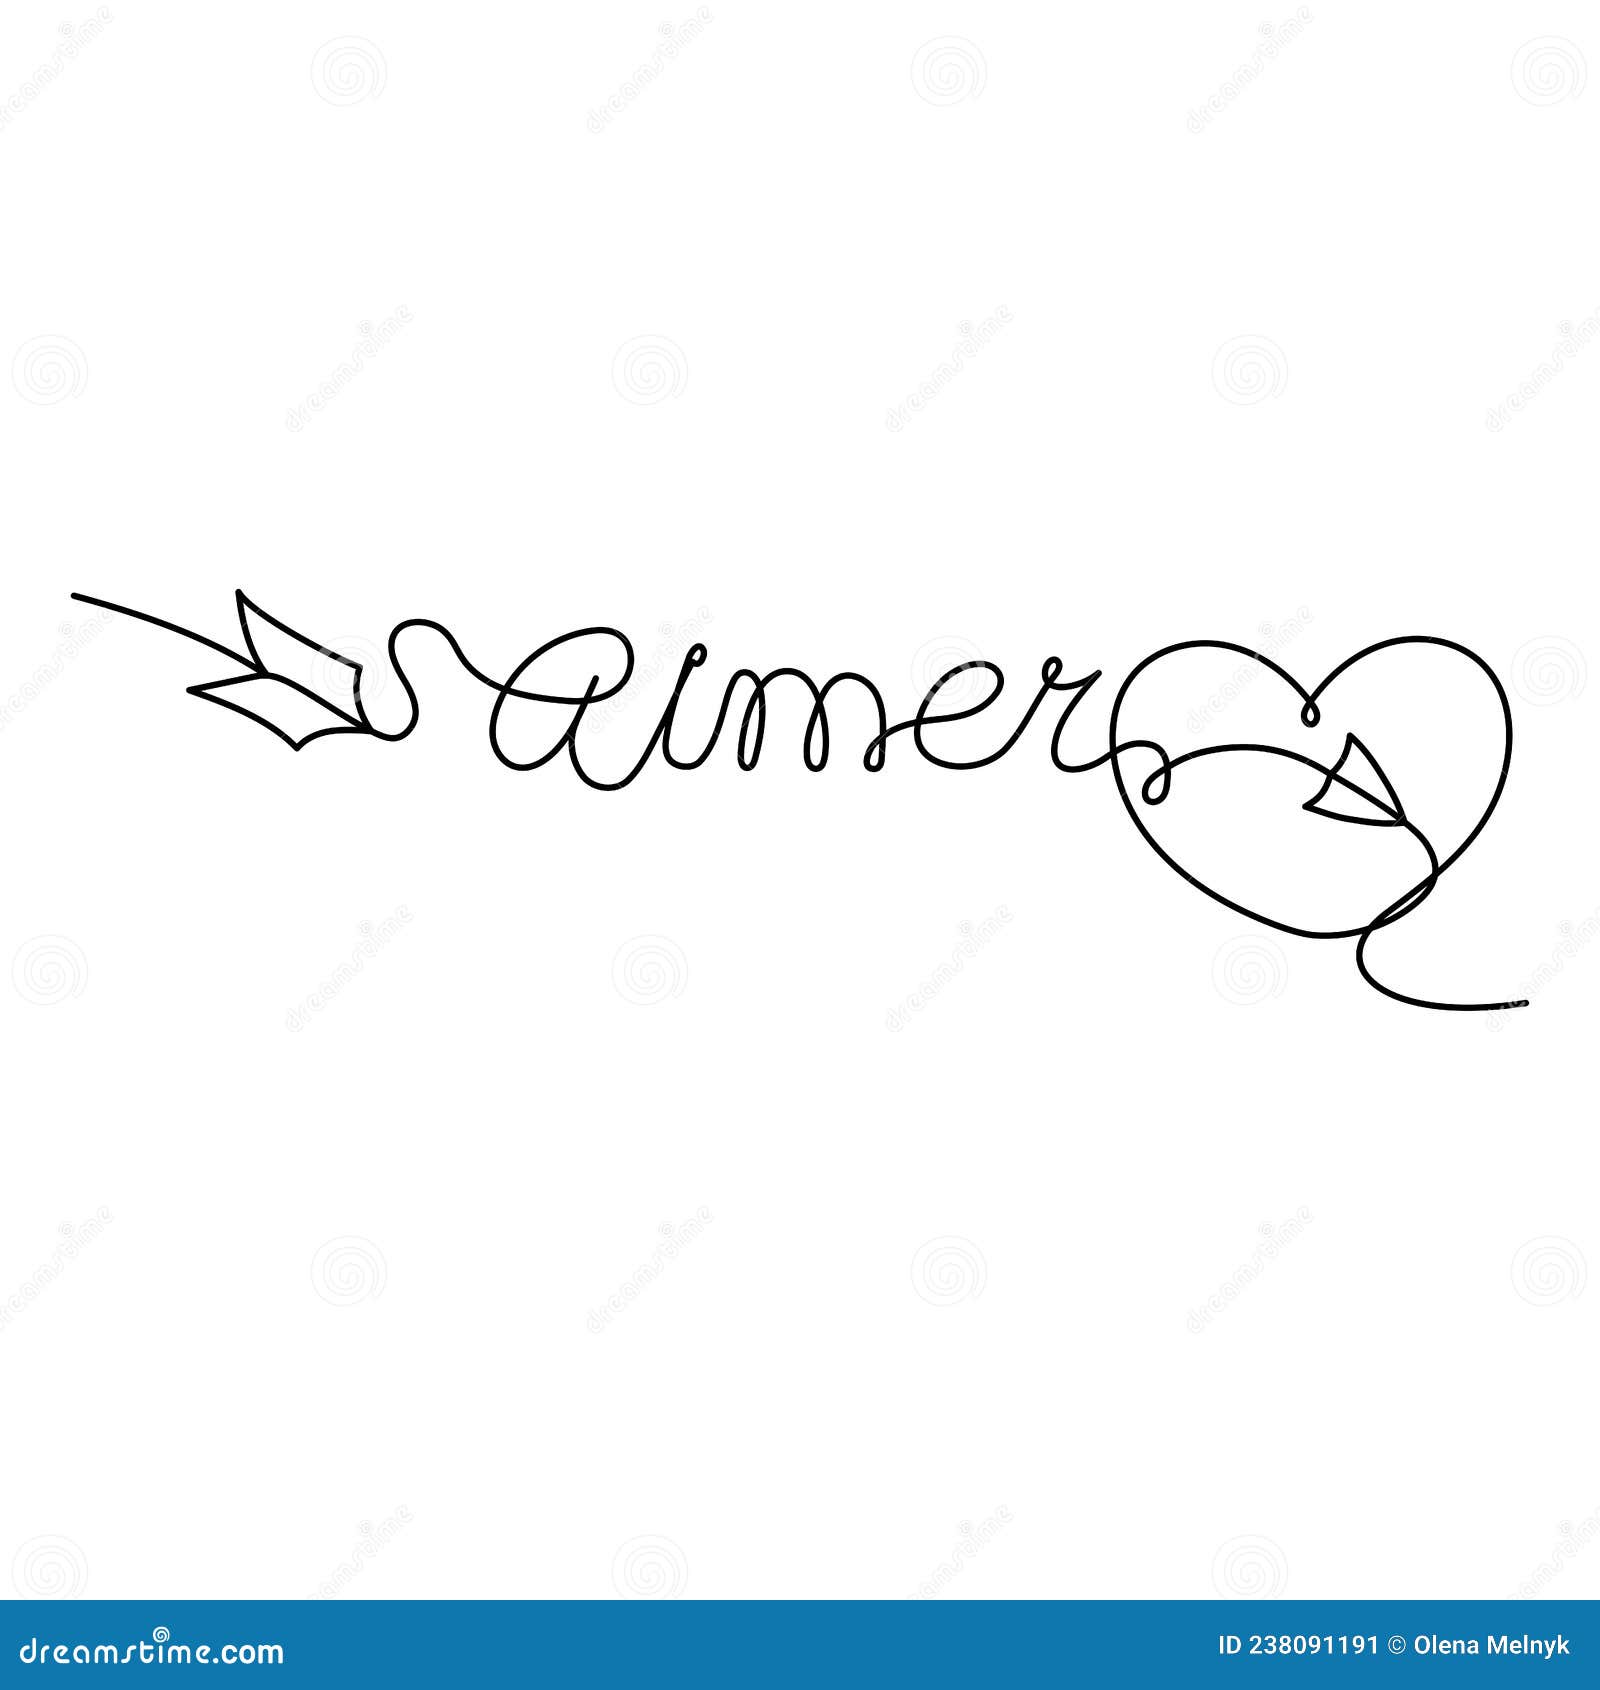 continuous one line lettering heart and aimer love in french in the form of an arrow.   for poster, card,